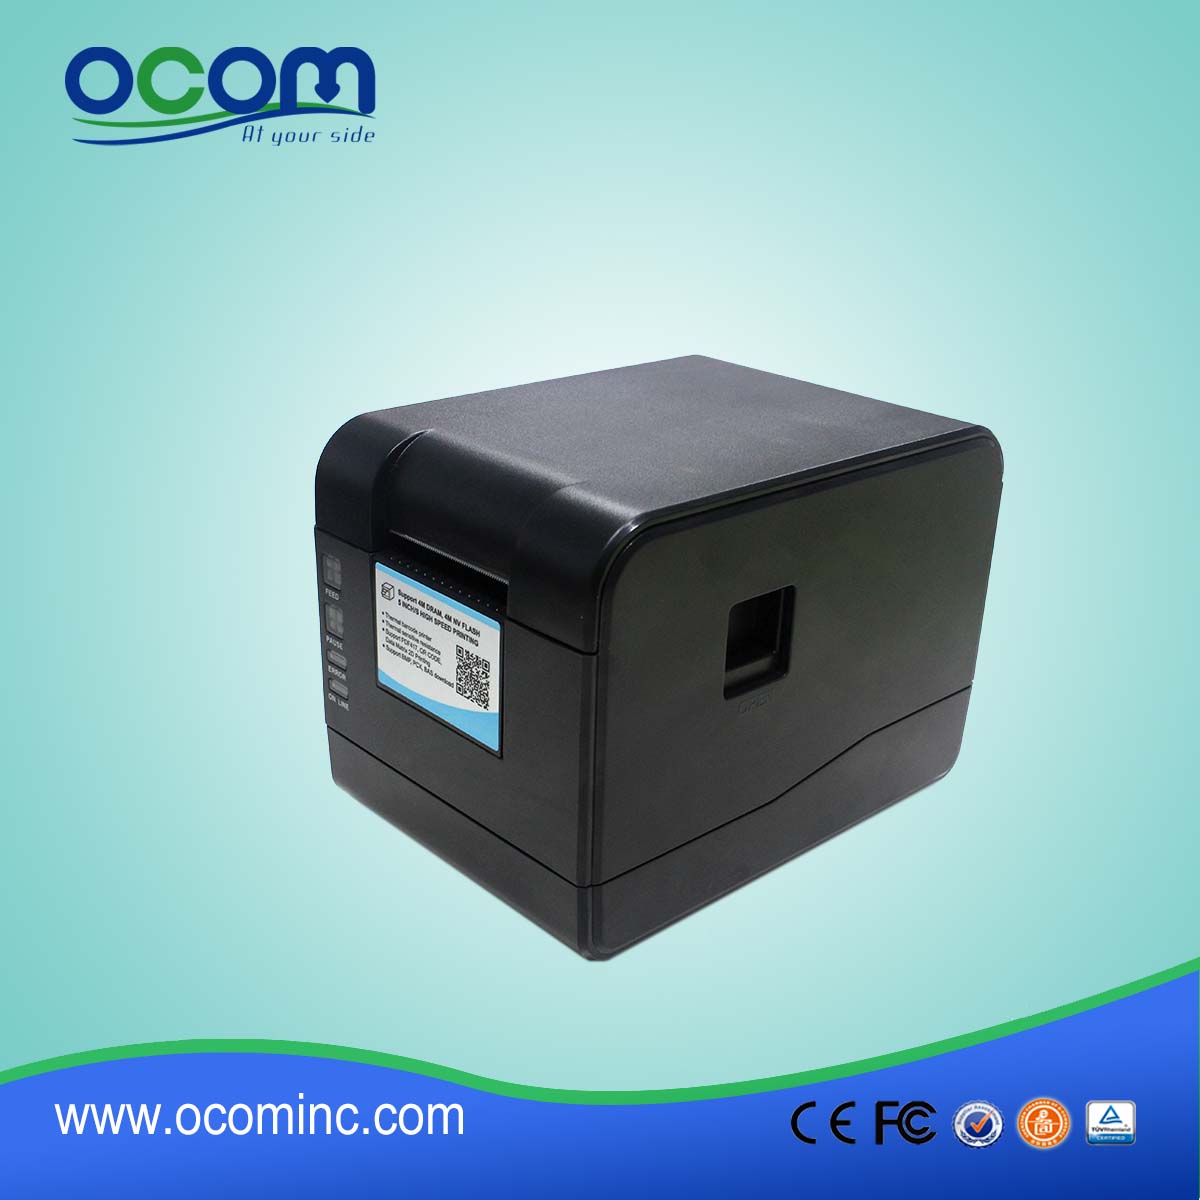 OCBP-006 2" Direct thermal barcode label printer Support thermal roll paper / adhesive paper